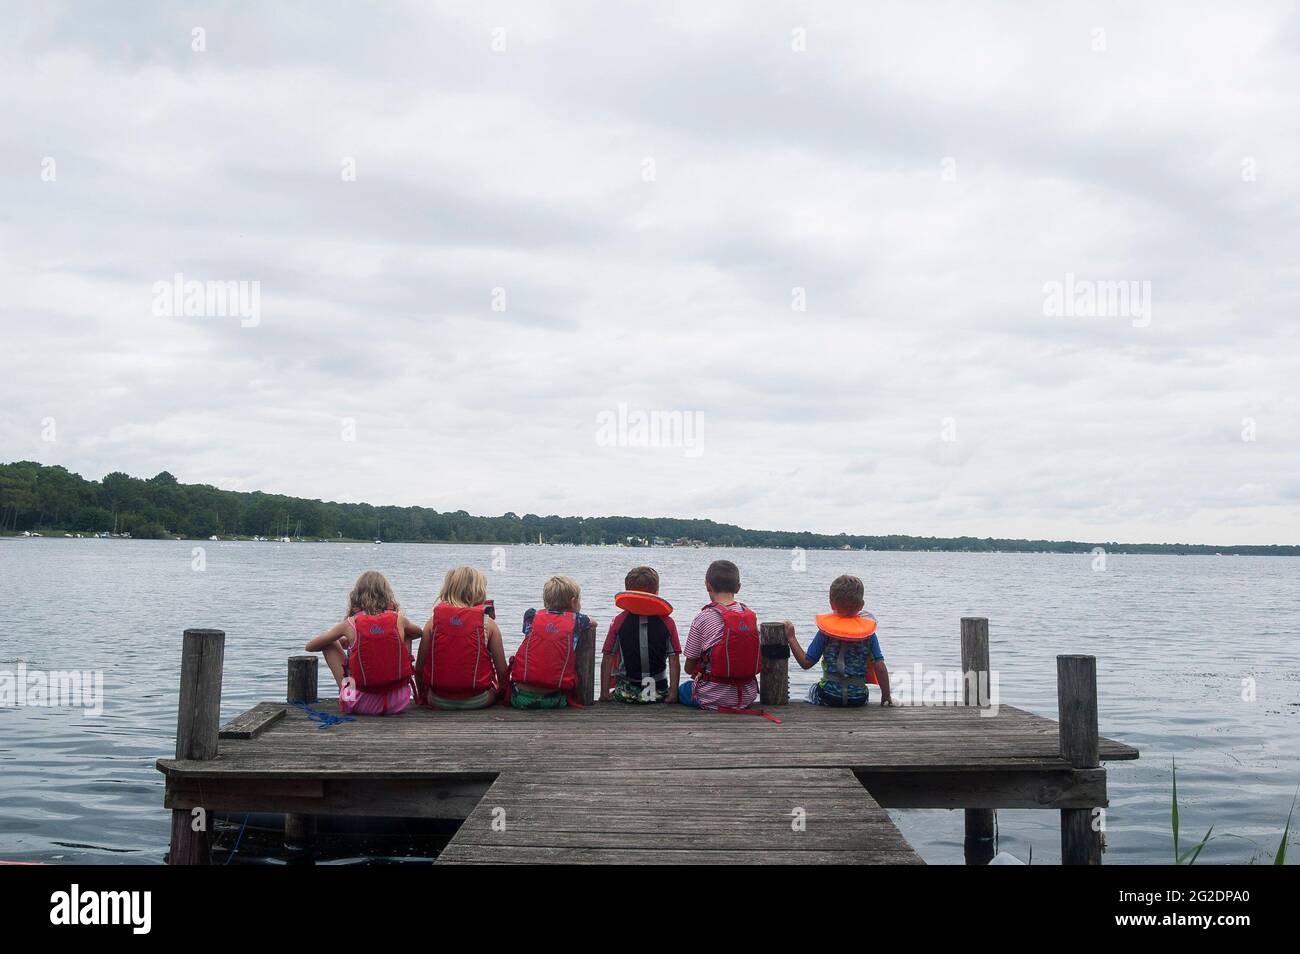 A group of young kids sitting on a wooden dock by a lake, with life jackets on. Stock Photo